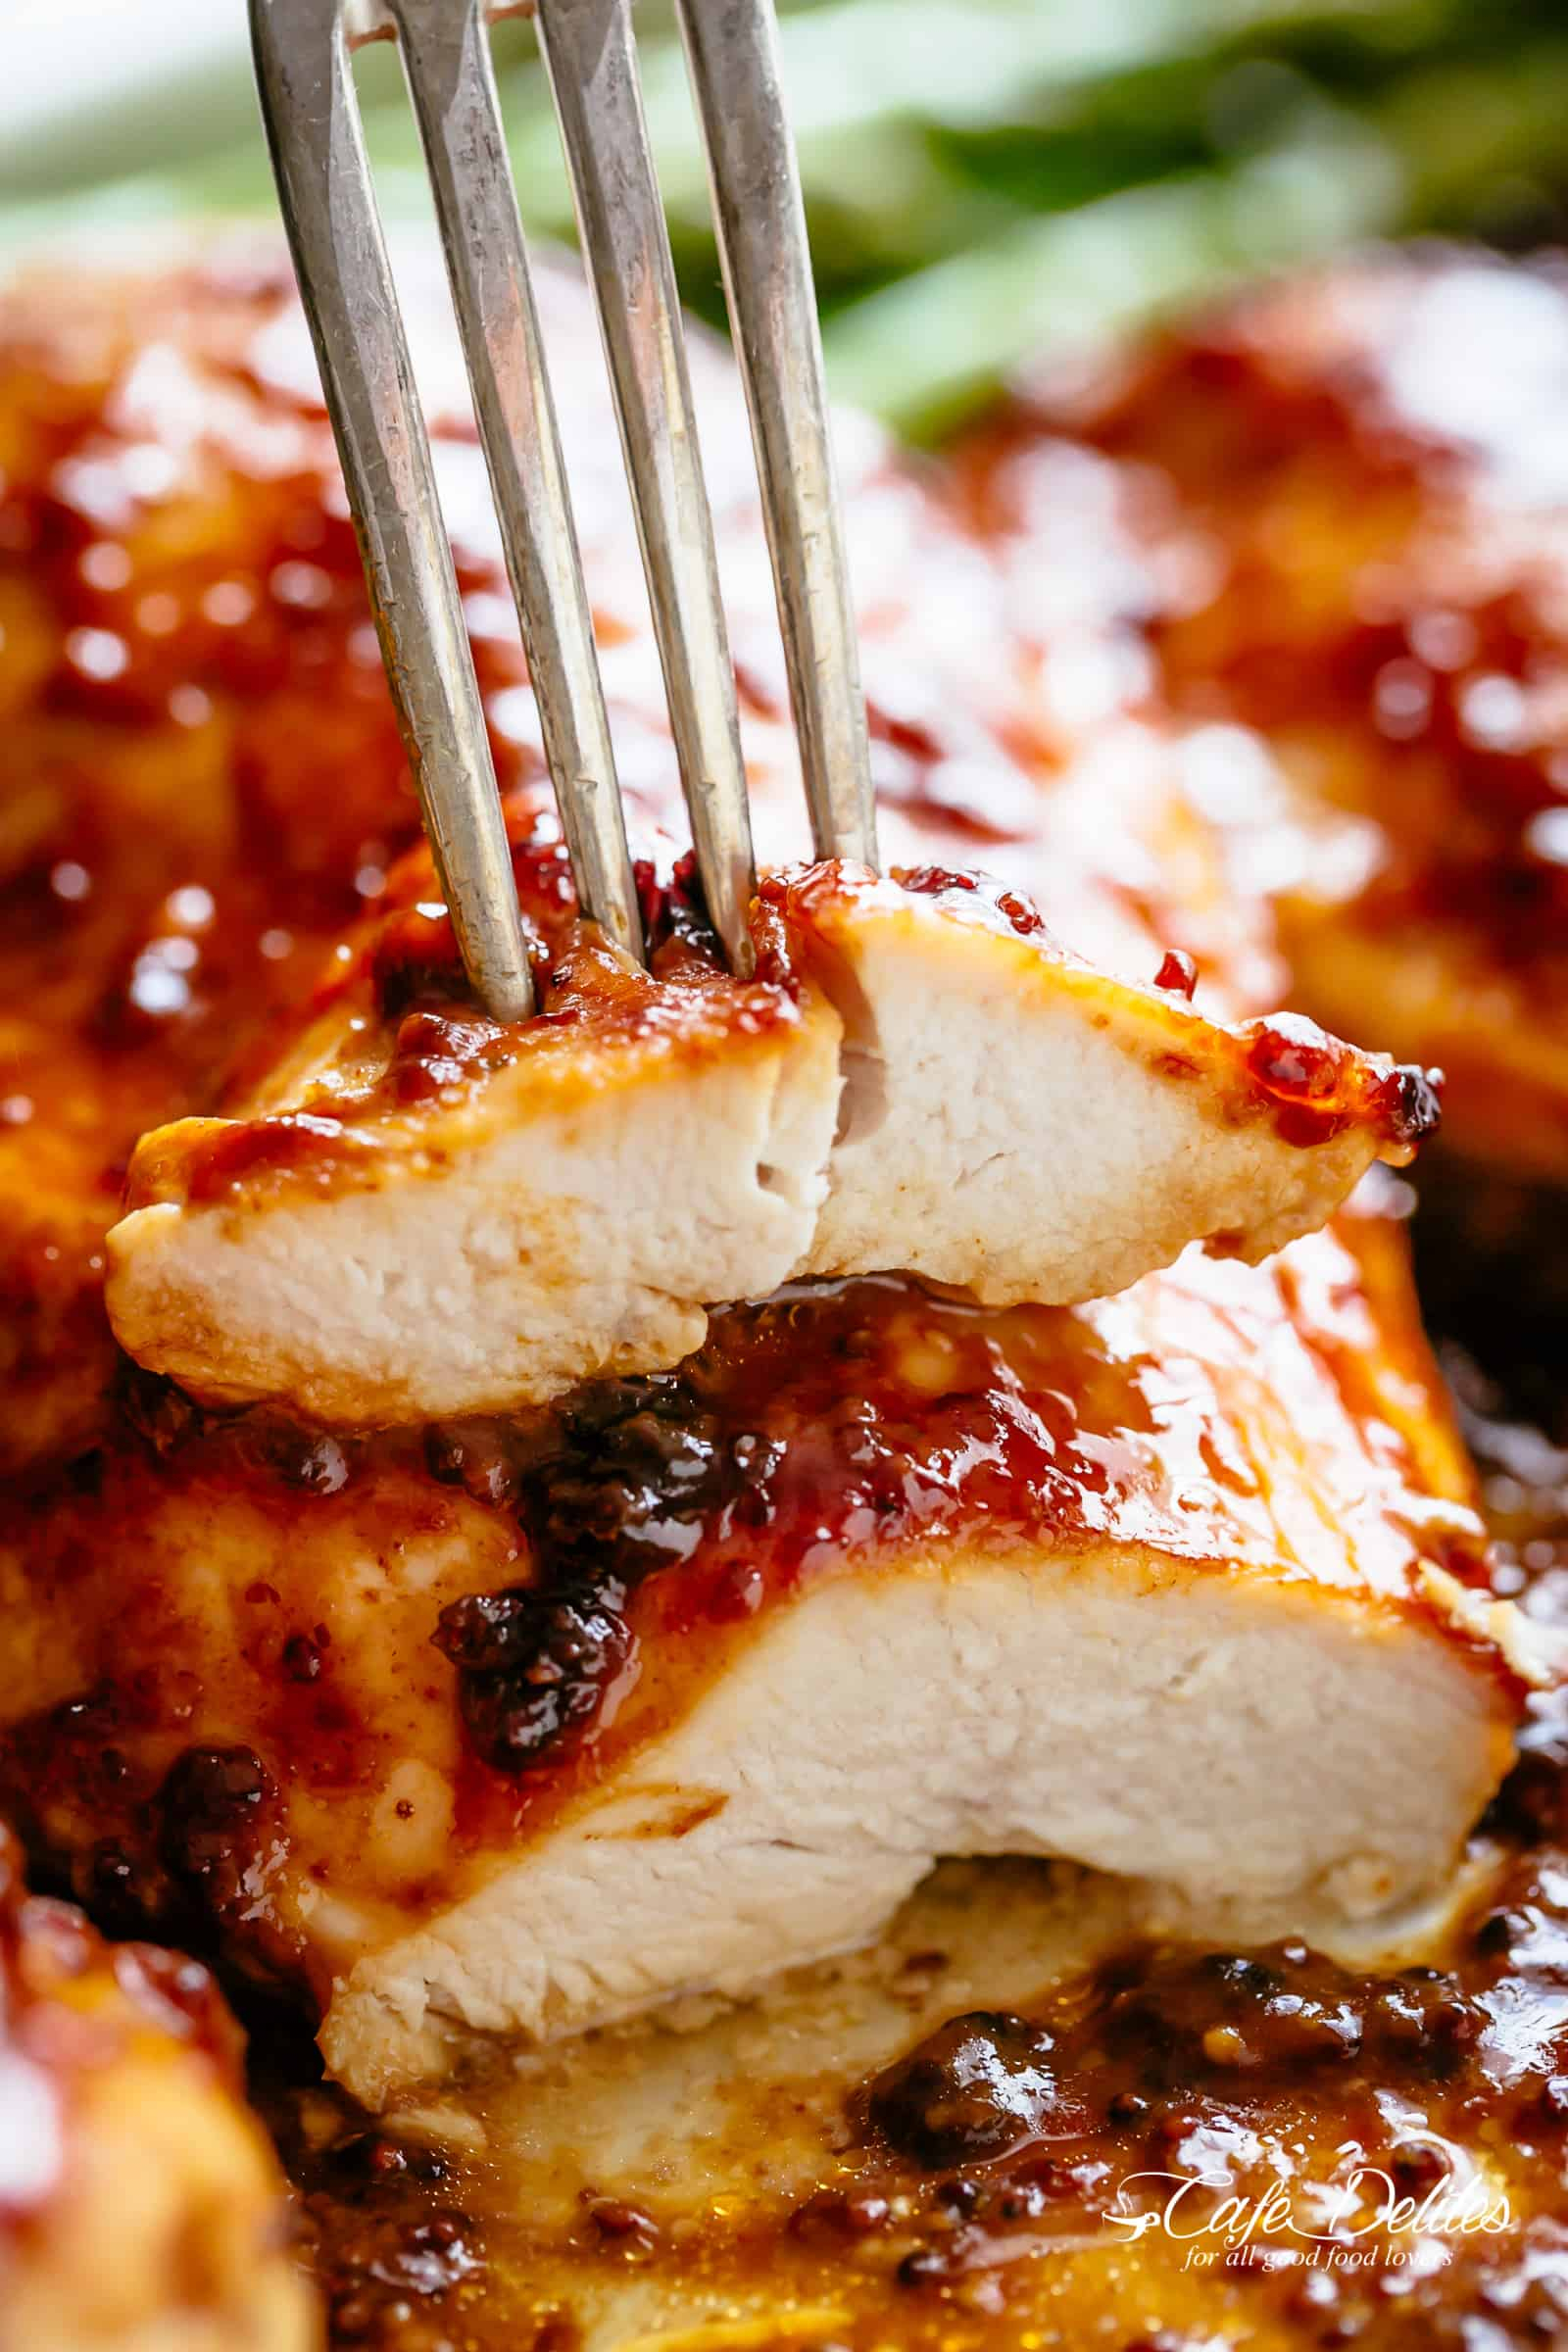 10 Stylish Dinner Ideas With Boneless Chicken Breast baked chicken breasts with honey mustard sauce cafe delites 2 2022